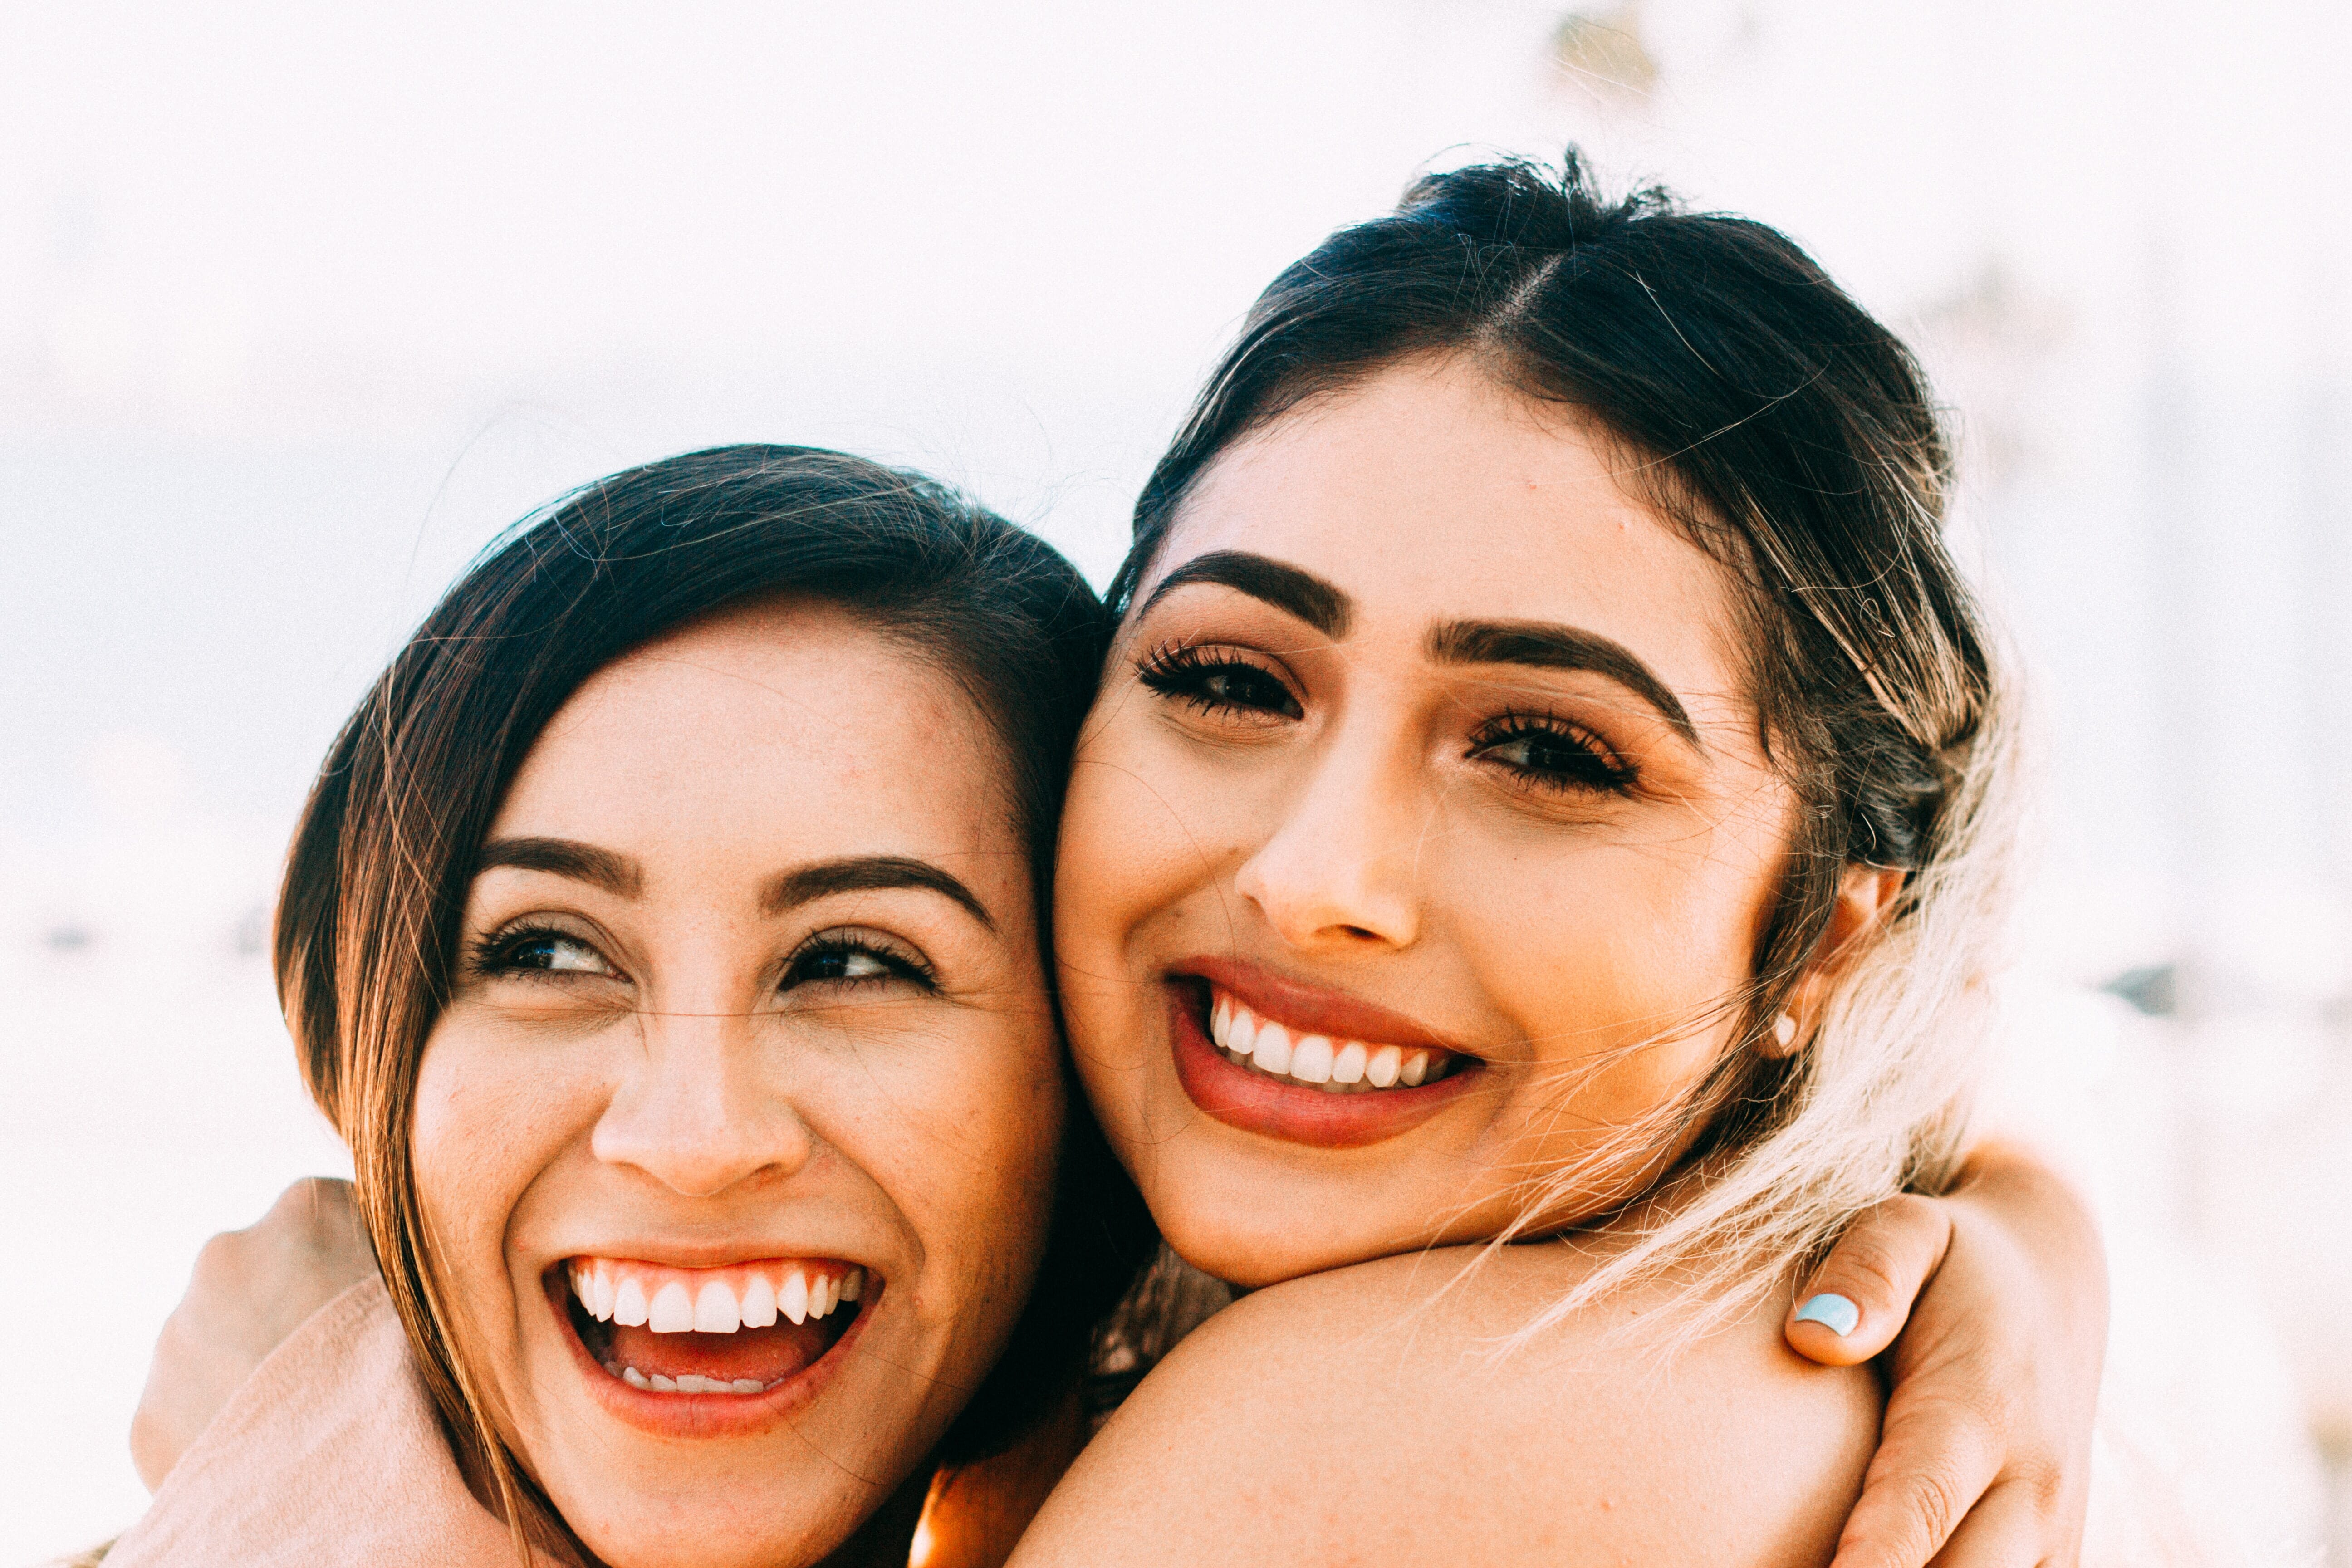 two female friends embracing